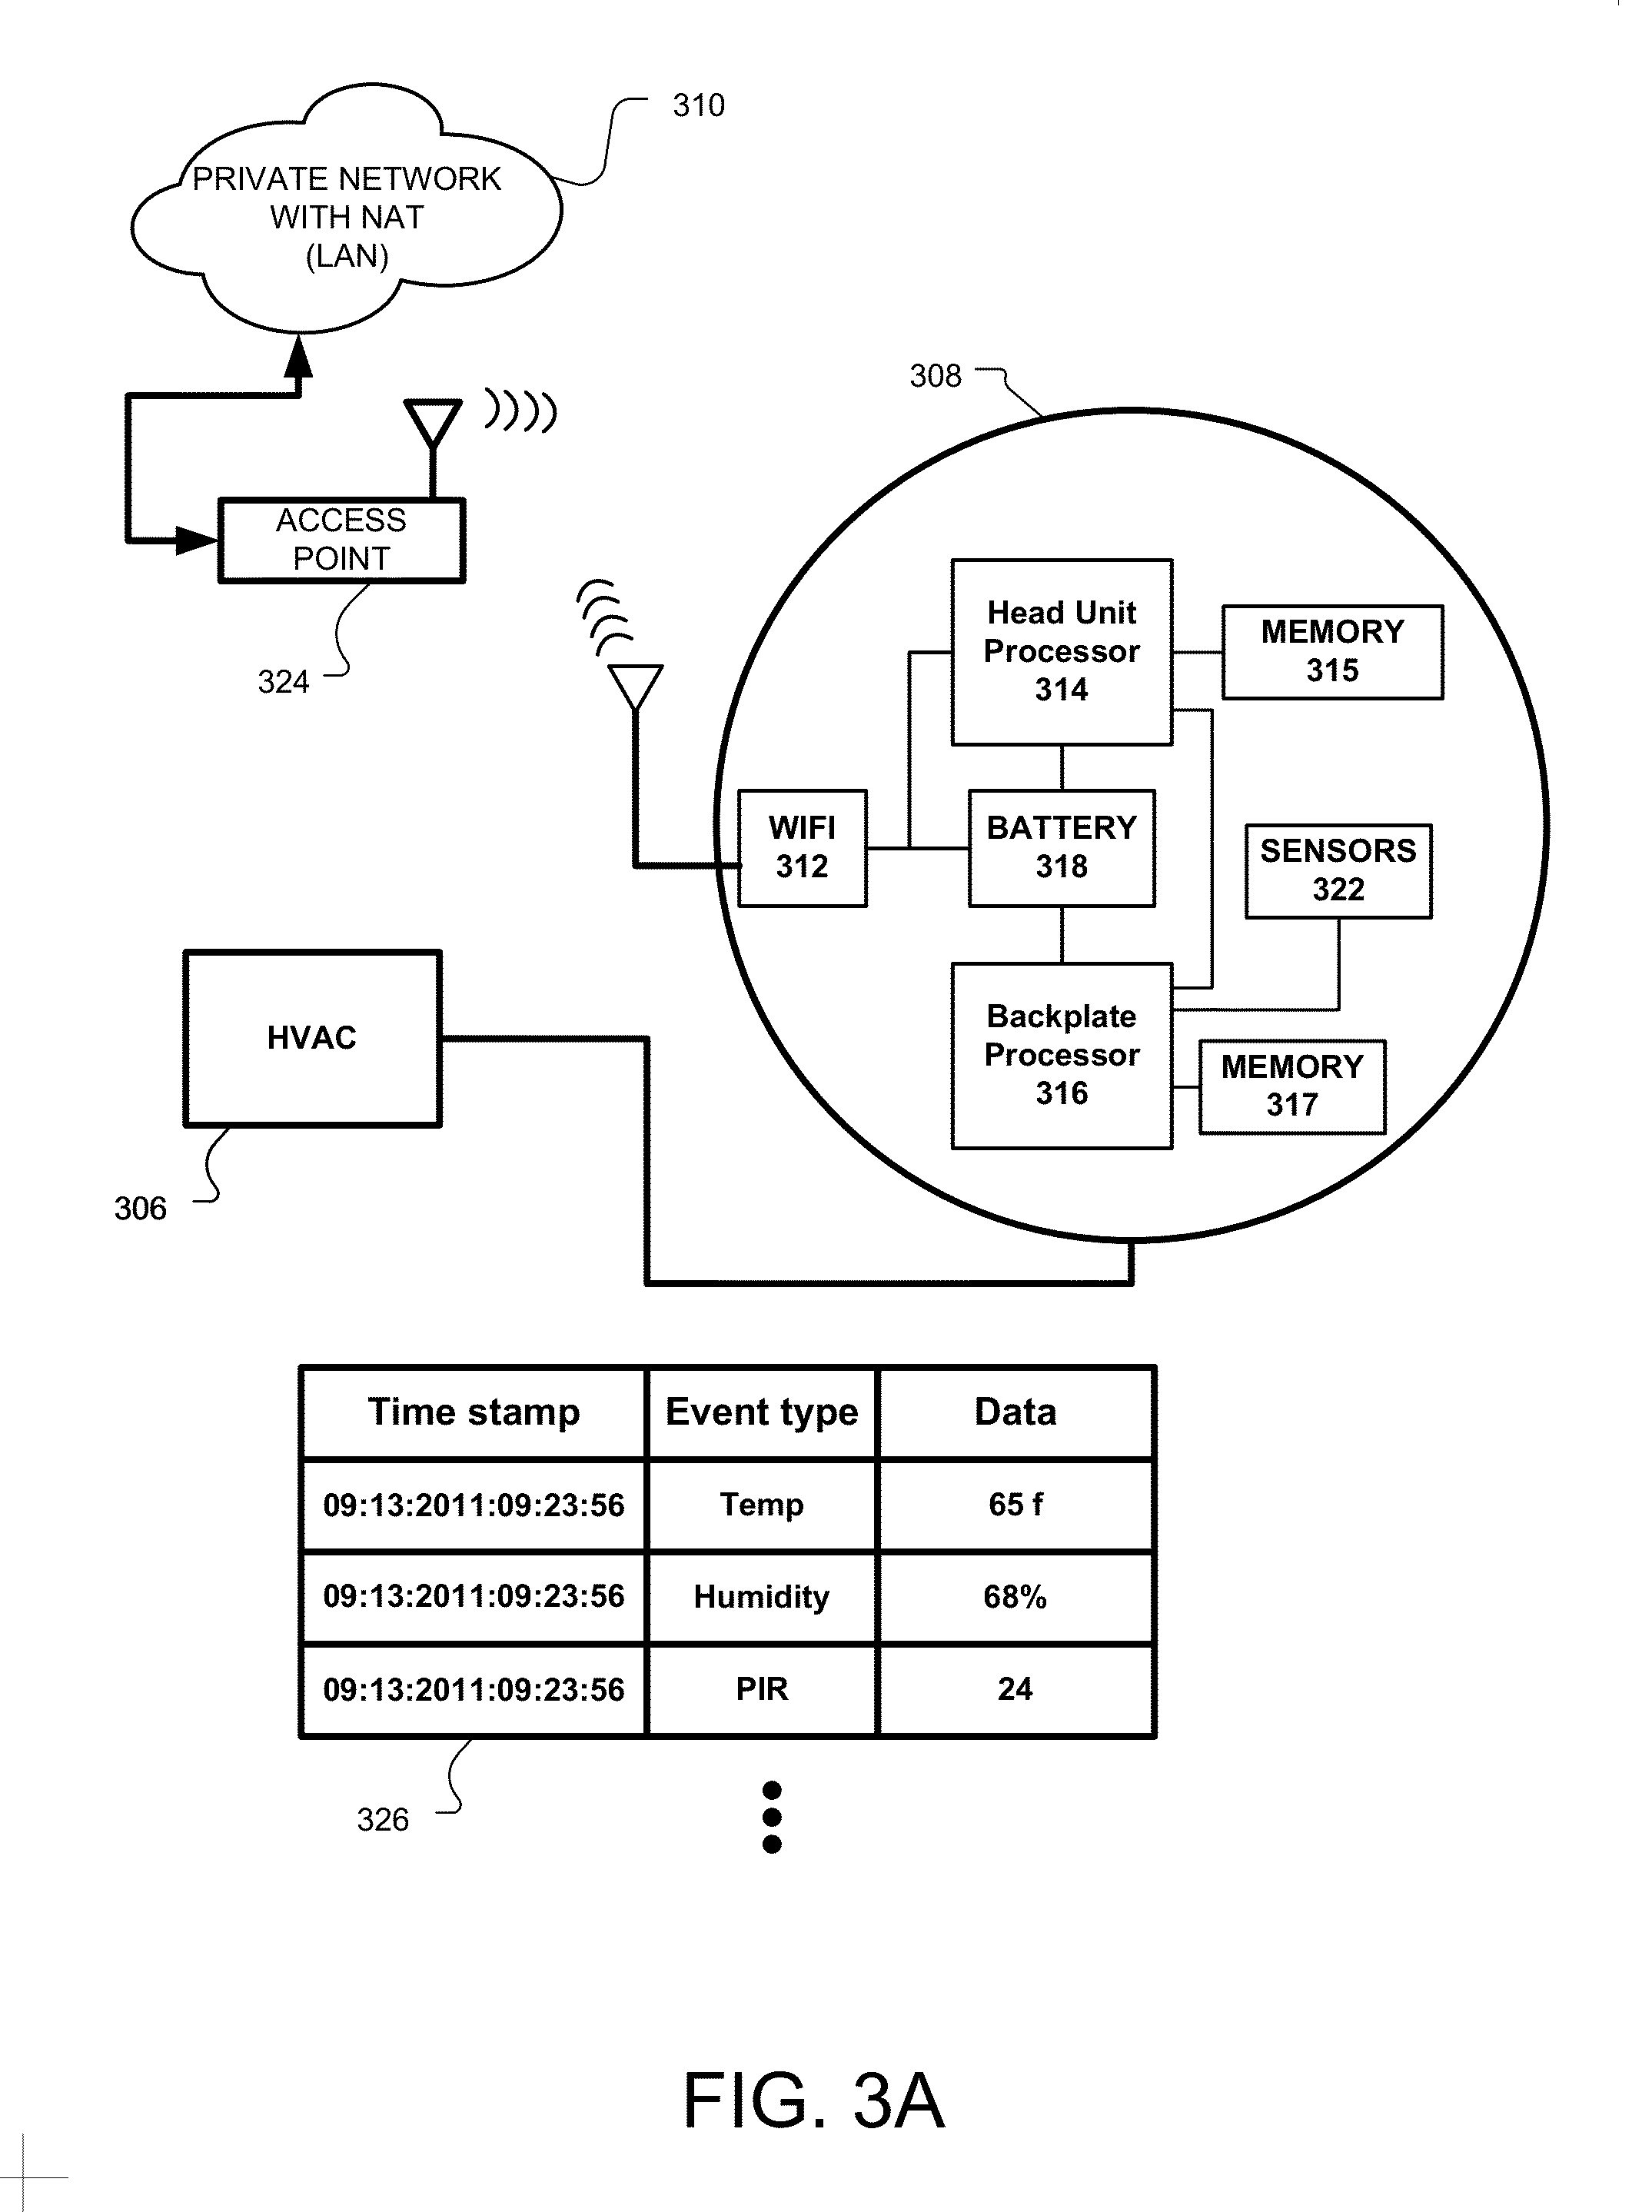 Thermostat with power stealing delay interval at transitions between power stealing states